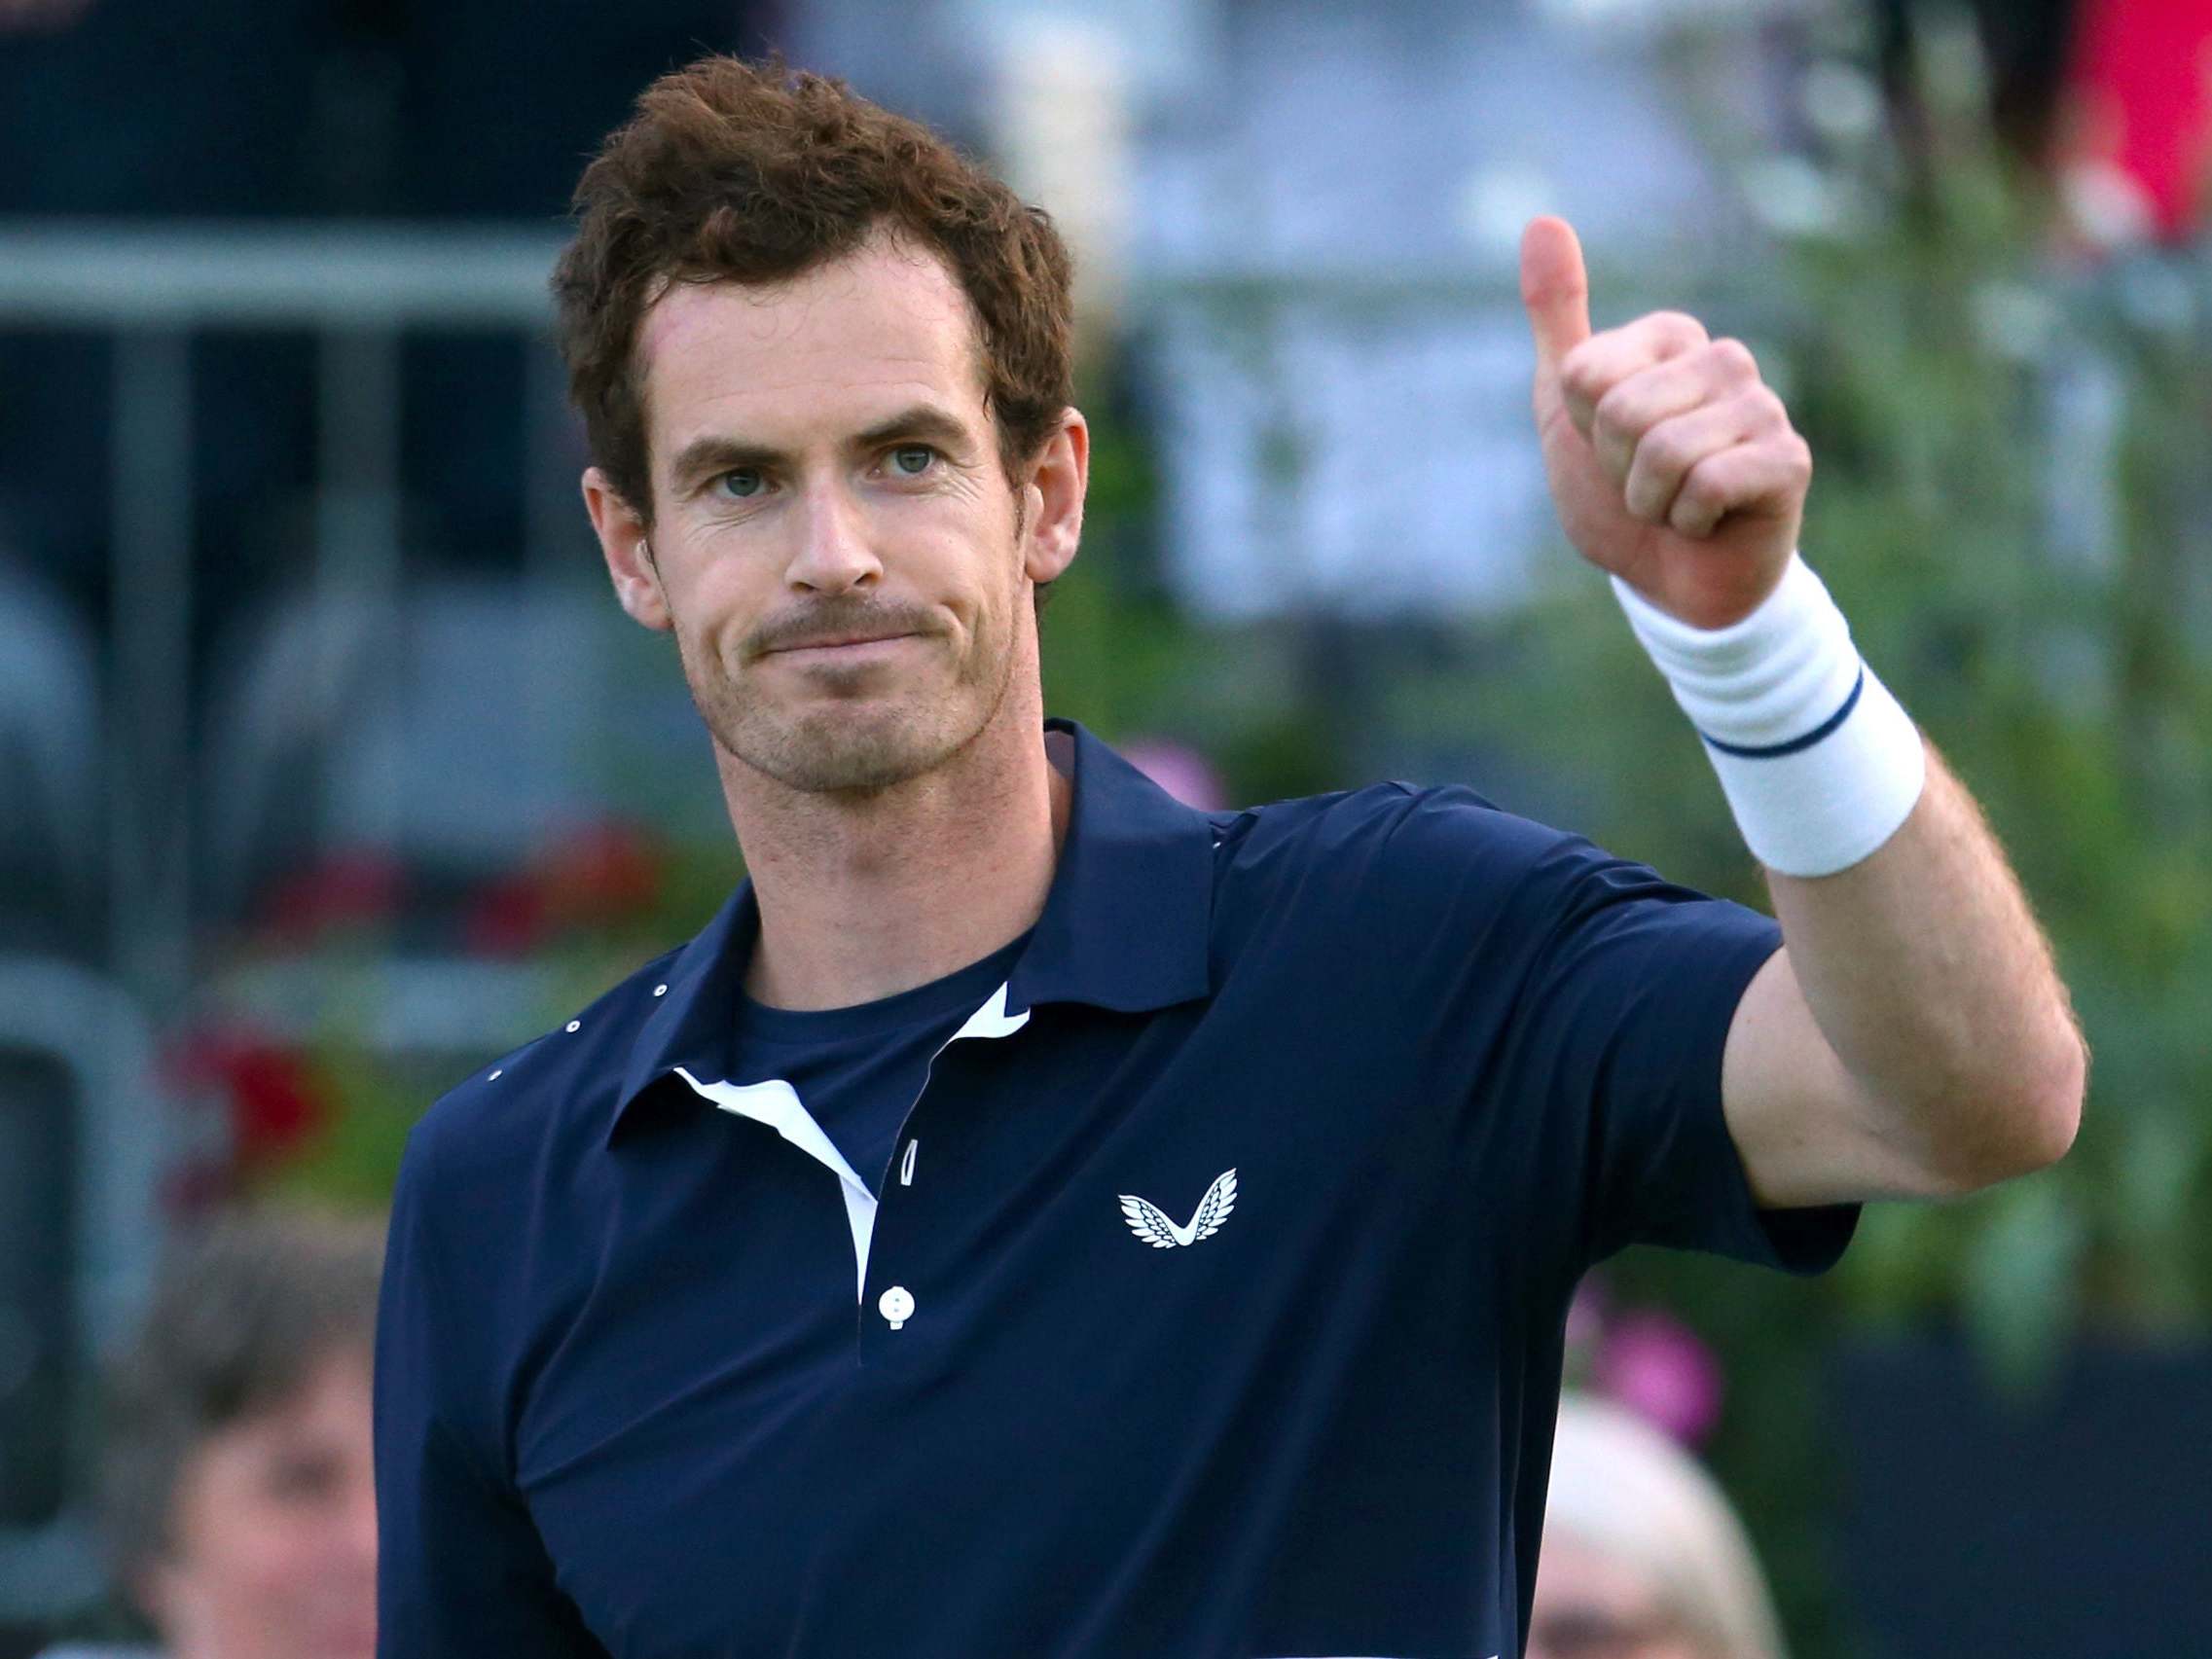 Coronavirus: Andy Murray to take part in virtual Madrid Open with opening match against Lucas Pouille